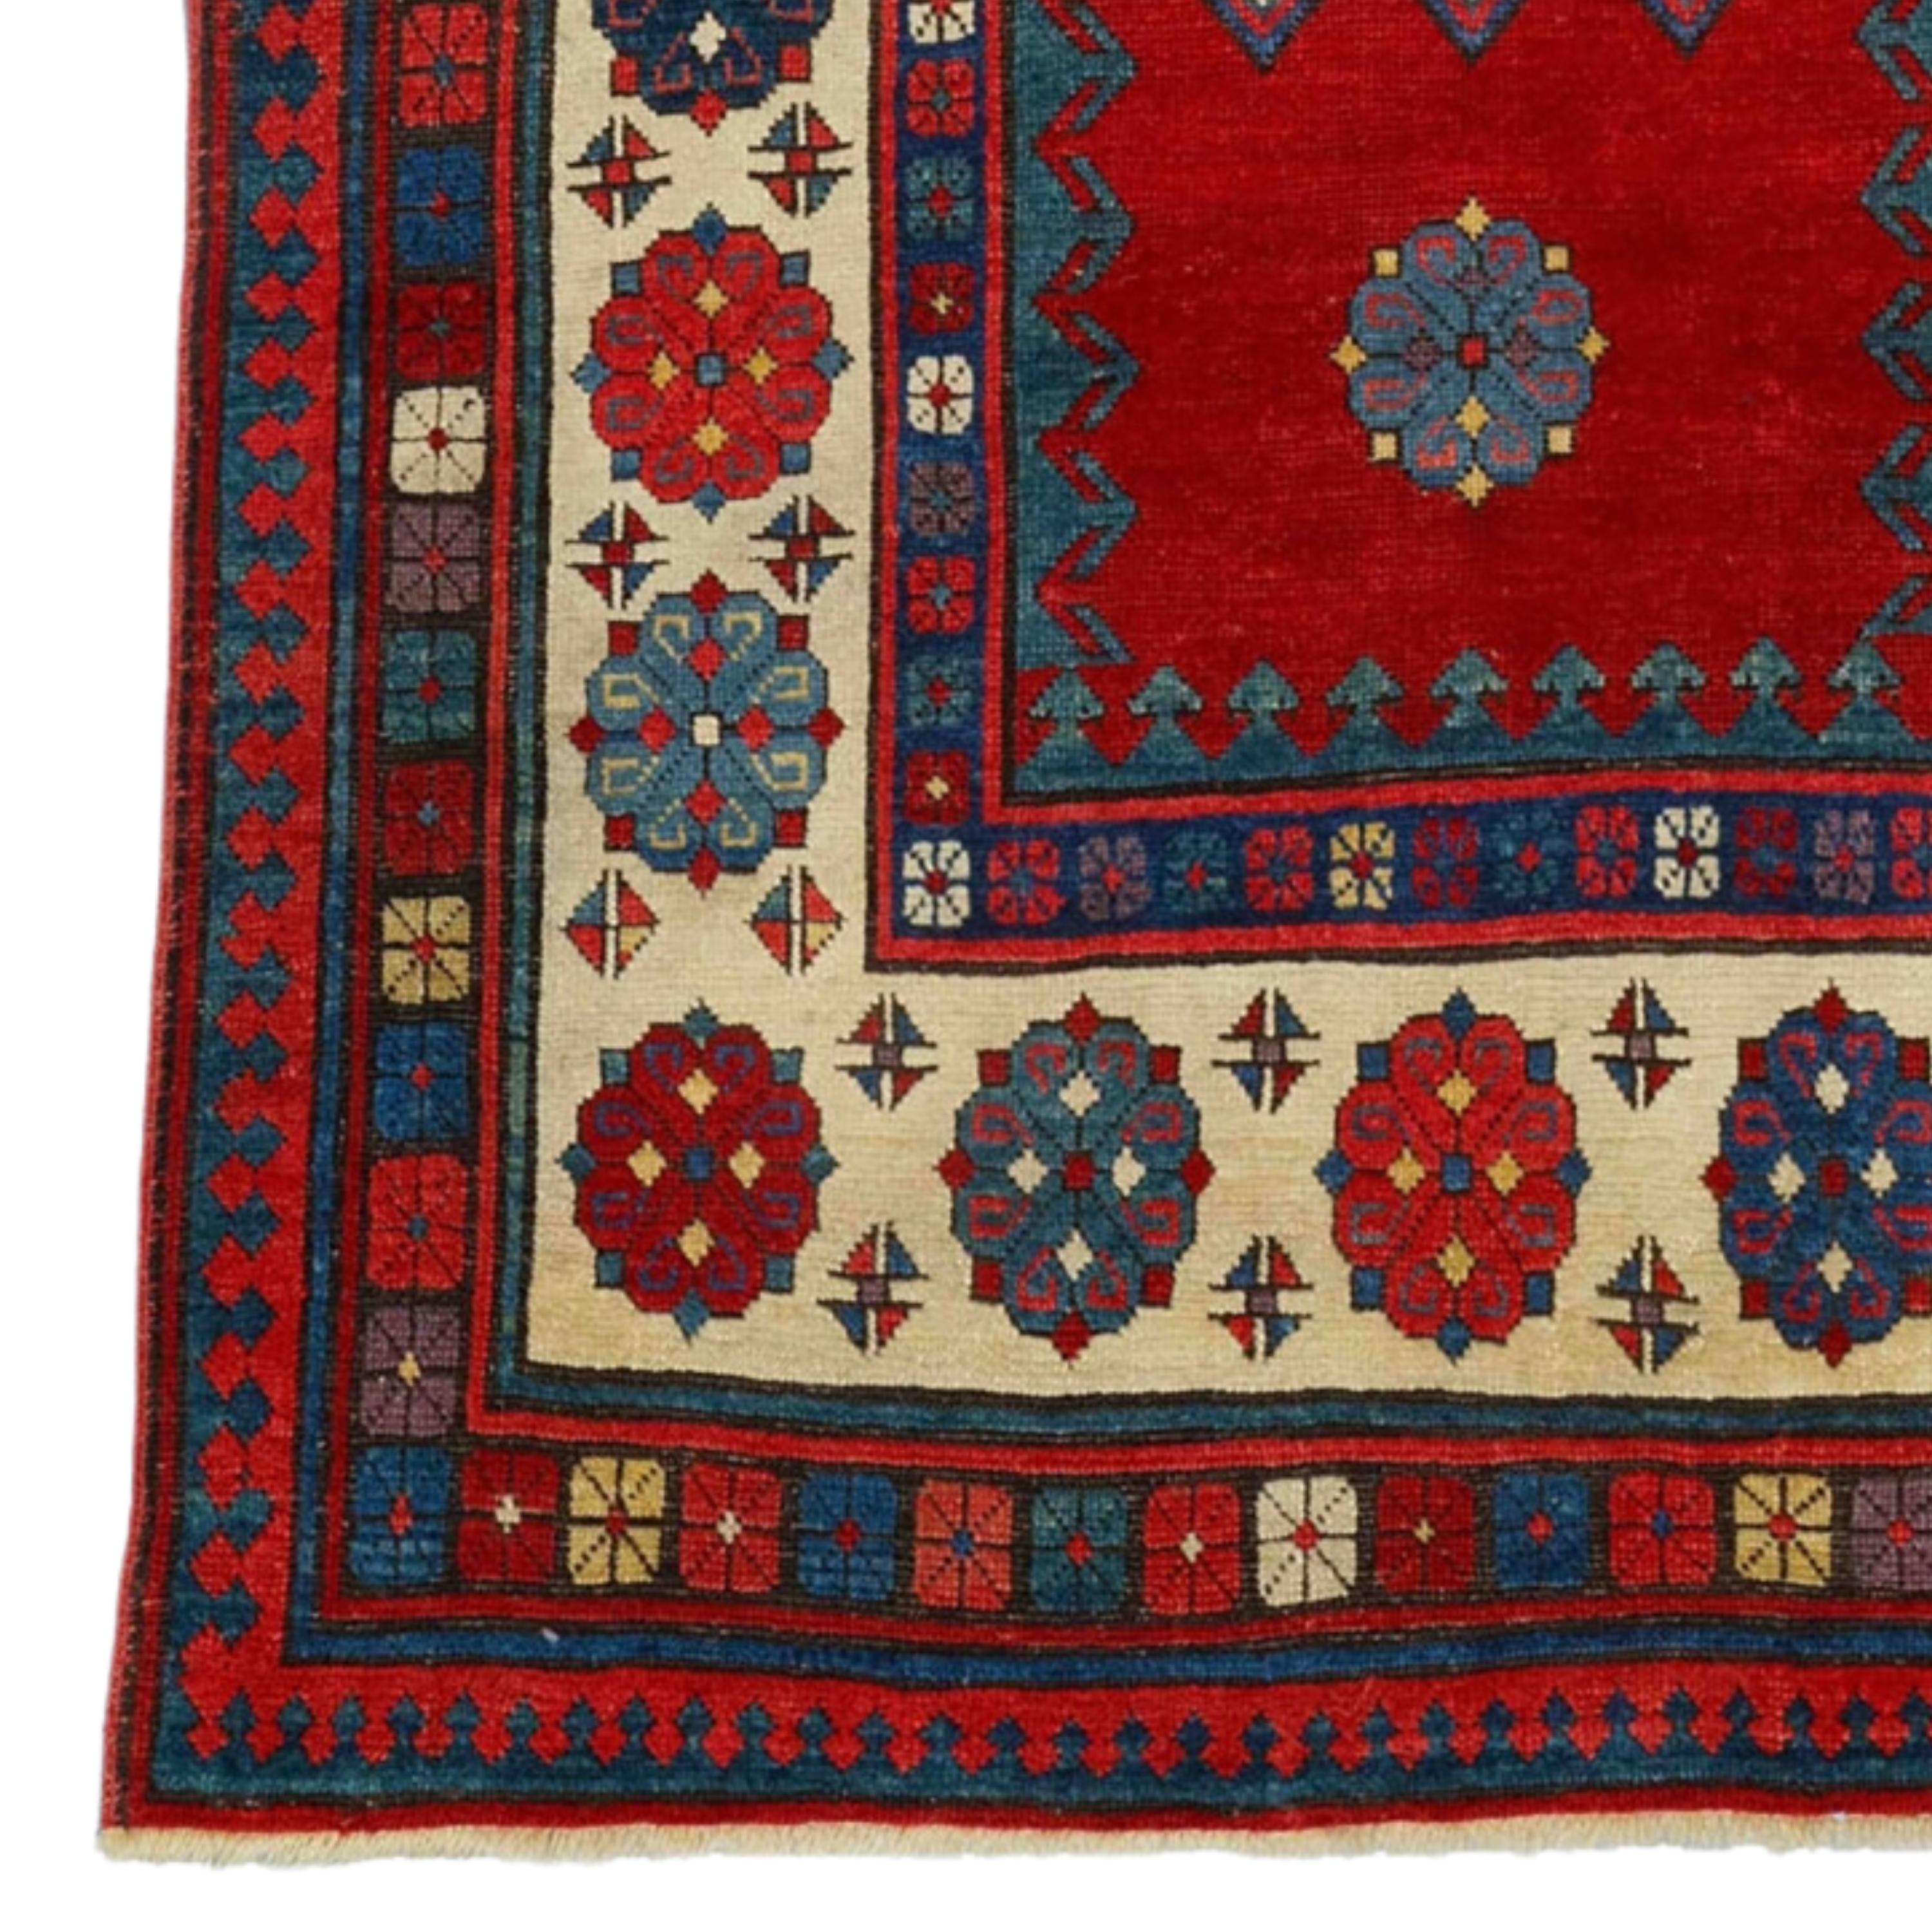 Caucasian Talish Rug  Caucasus Rug
South East Caucasus, Moghan region Talish Rug

Second half 19th Century South East Caucasus, Moghan region Talish Rug A rare Moghan woven in a long rug format. The Red met hane field is surrounded by green trefoils